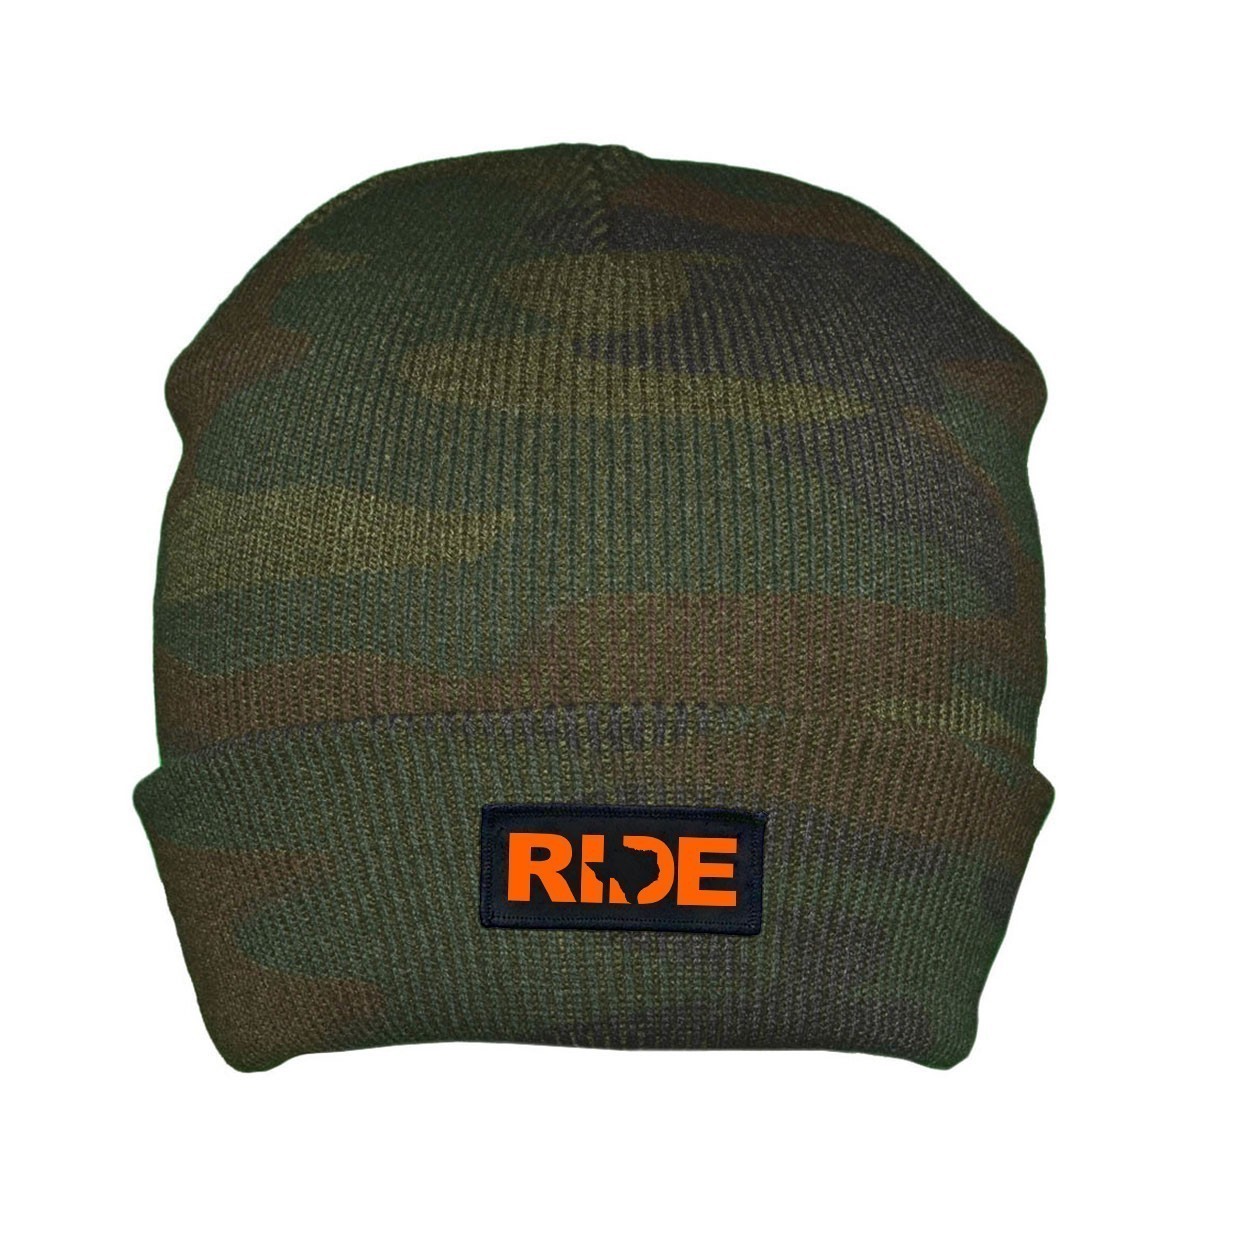 Ride Texas Night Out Woven Patch Roll Up Skully Beanie Camo (Orange Logo)